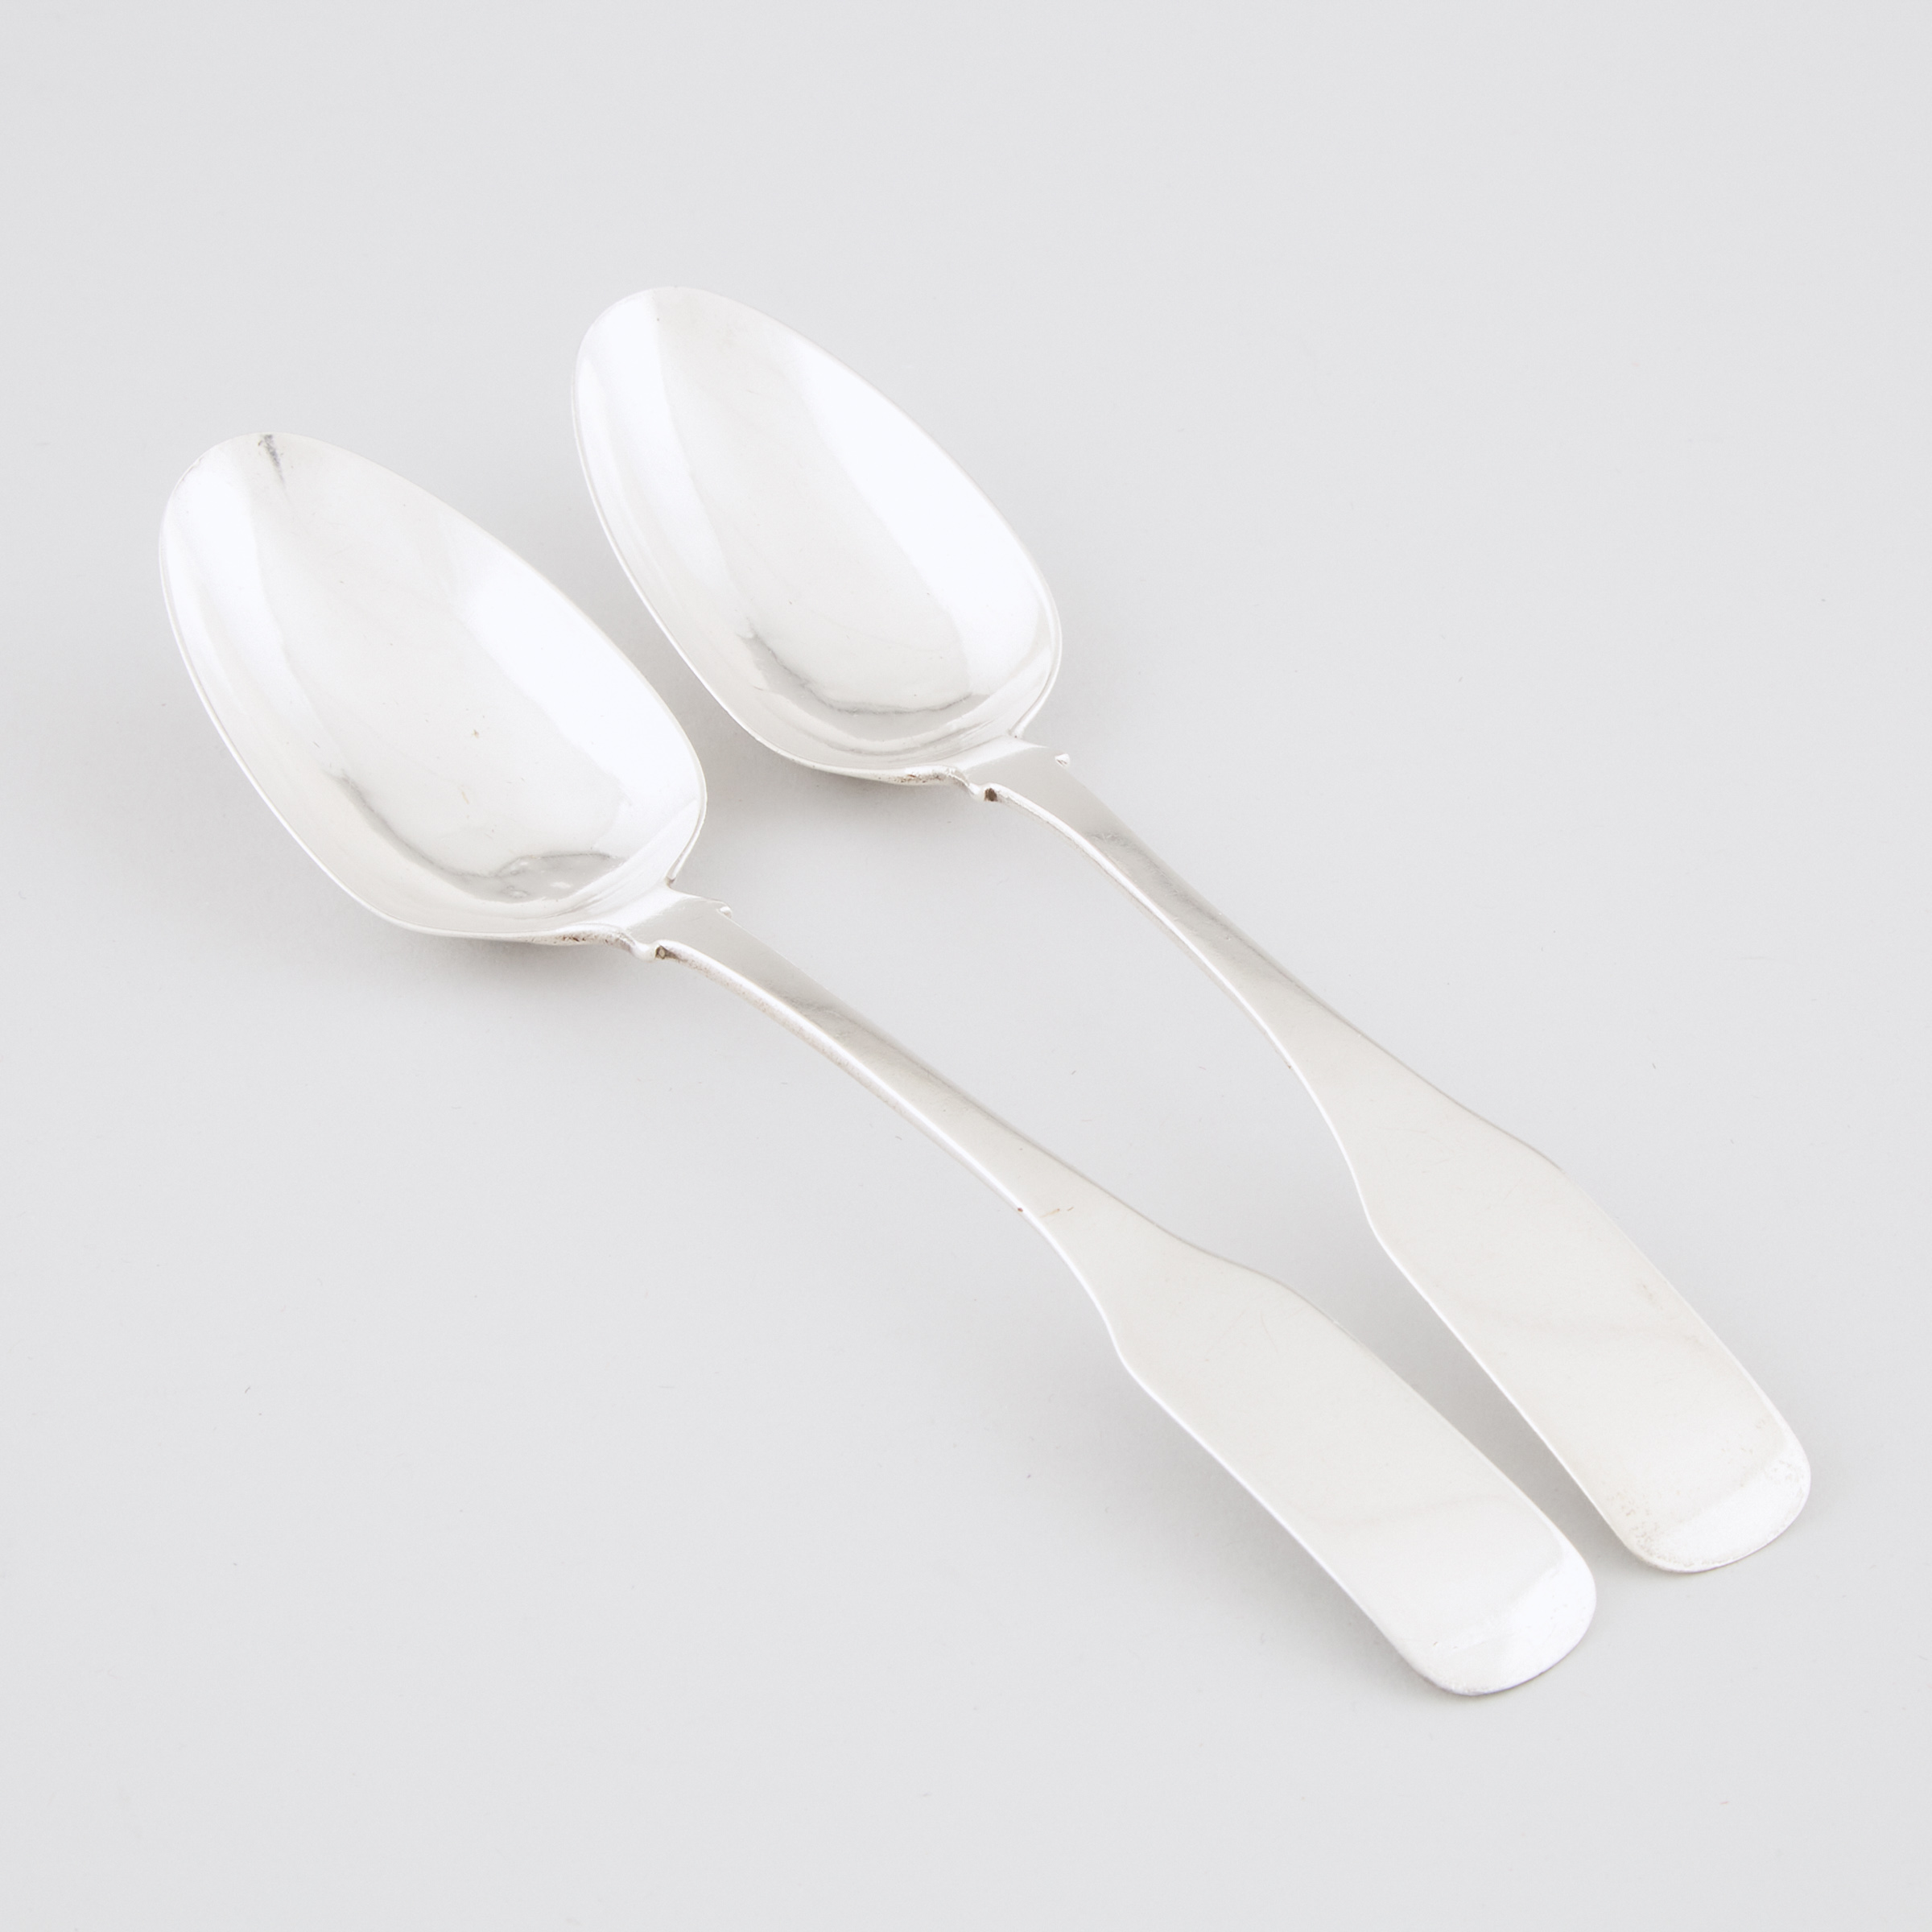 Pair of Canadian Silver Fiddle Pattern Table Spoons, Nathaniel Starnes, Montreal, Que., c.1830